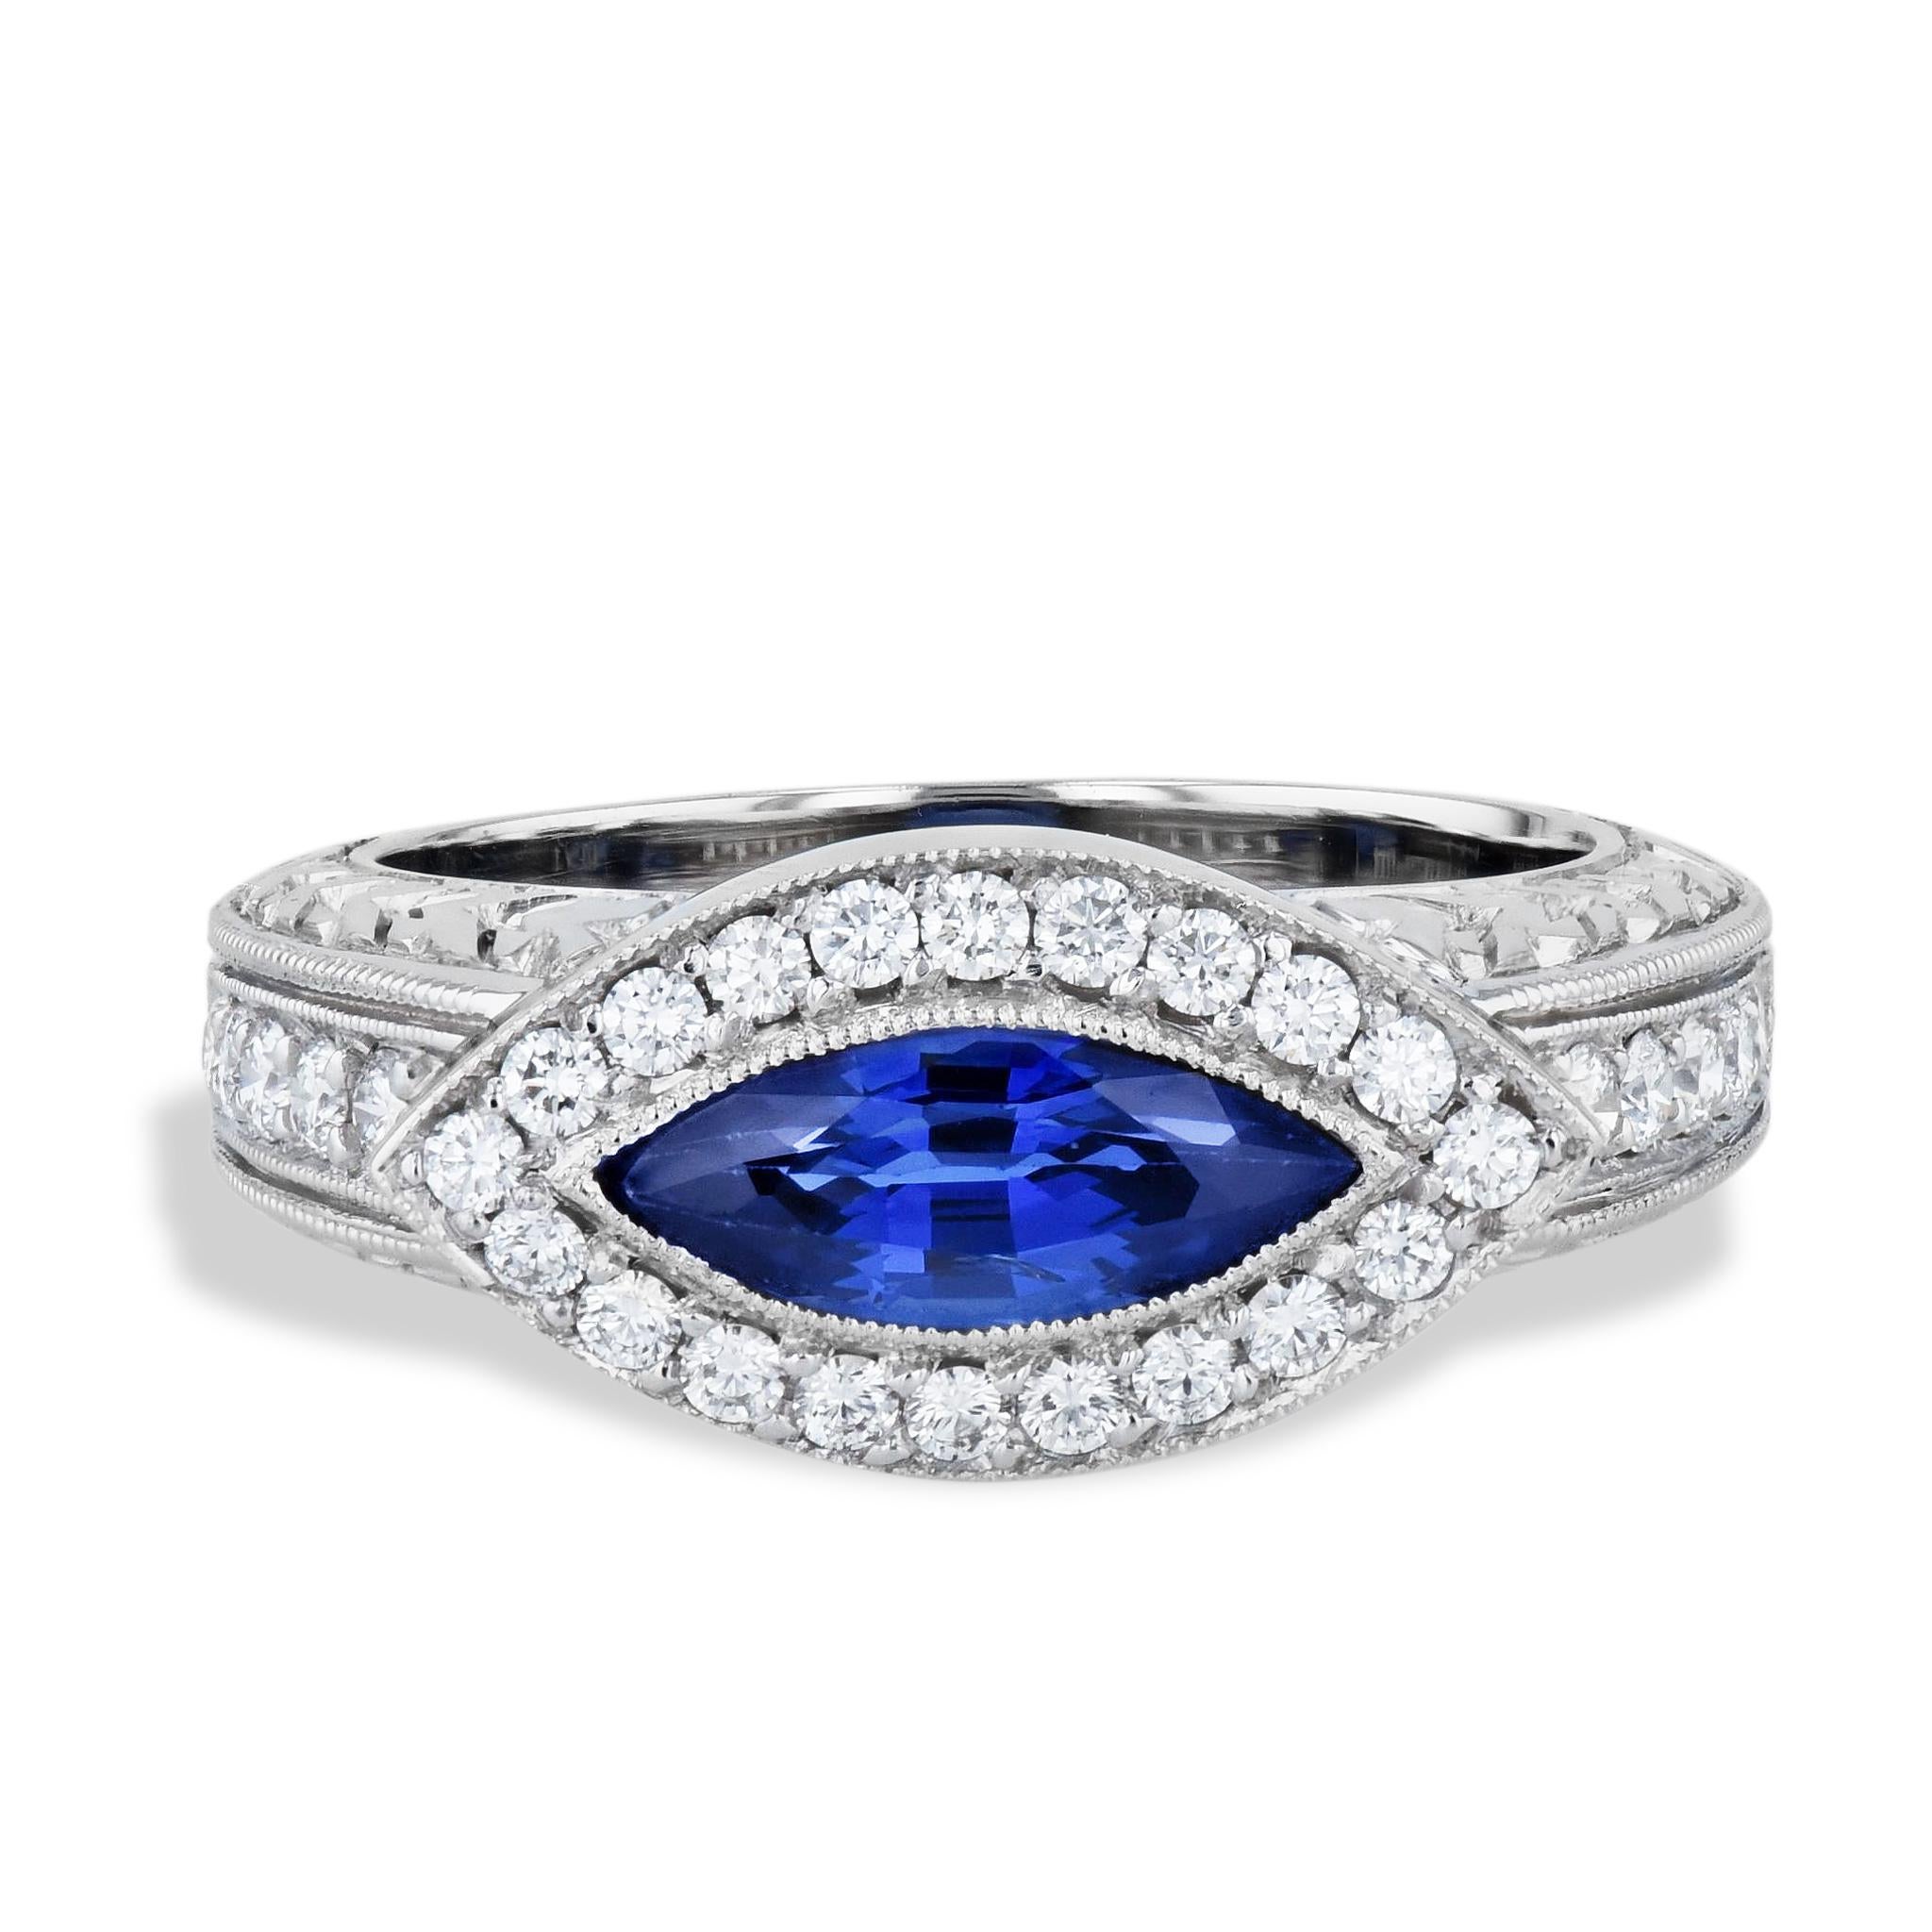 Capture the vintage elegance of our Retro Antique Ring, crafted with Platinum and featuring a brilliant Marquise Cut Blue Sapphire, bezel-set in the center, with round diamond pave set around the sapphire. 
This handmade piece from the HH Collection